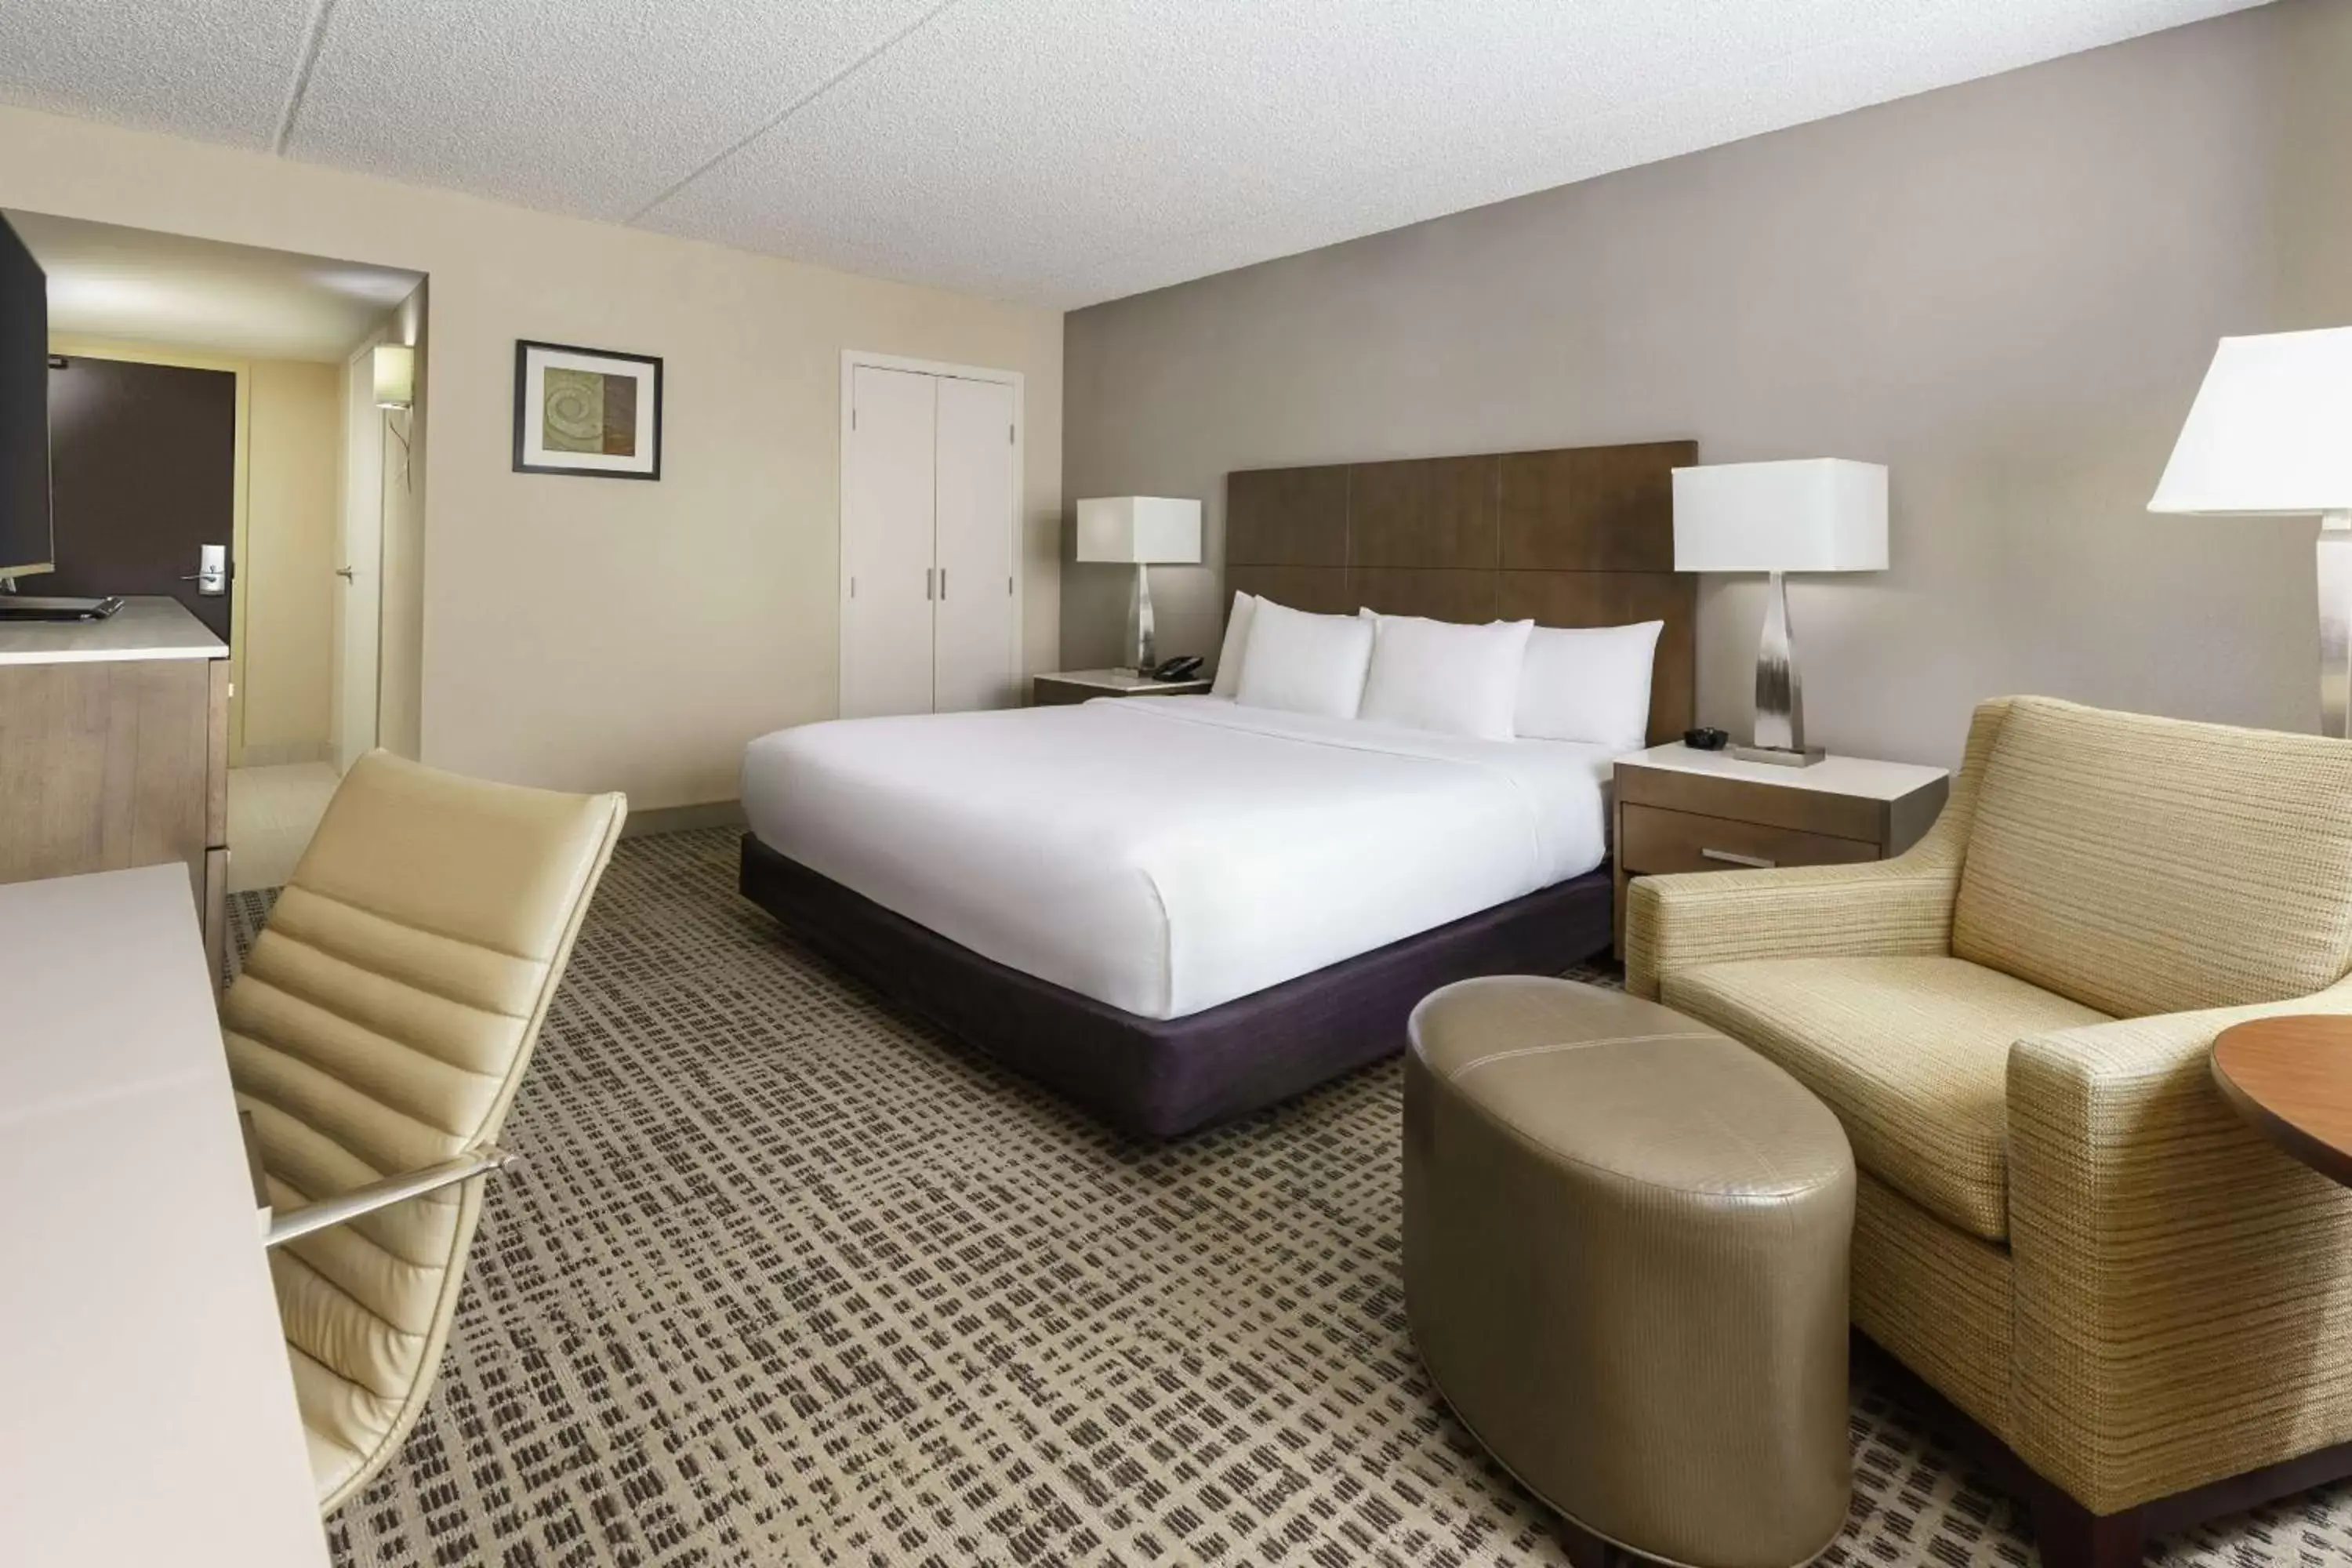 Bedroom in DoubleTree by Hilton Orlando Airport Hotel